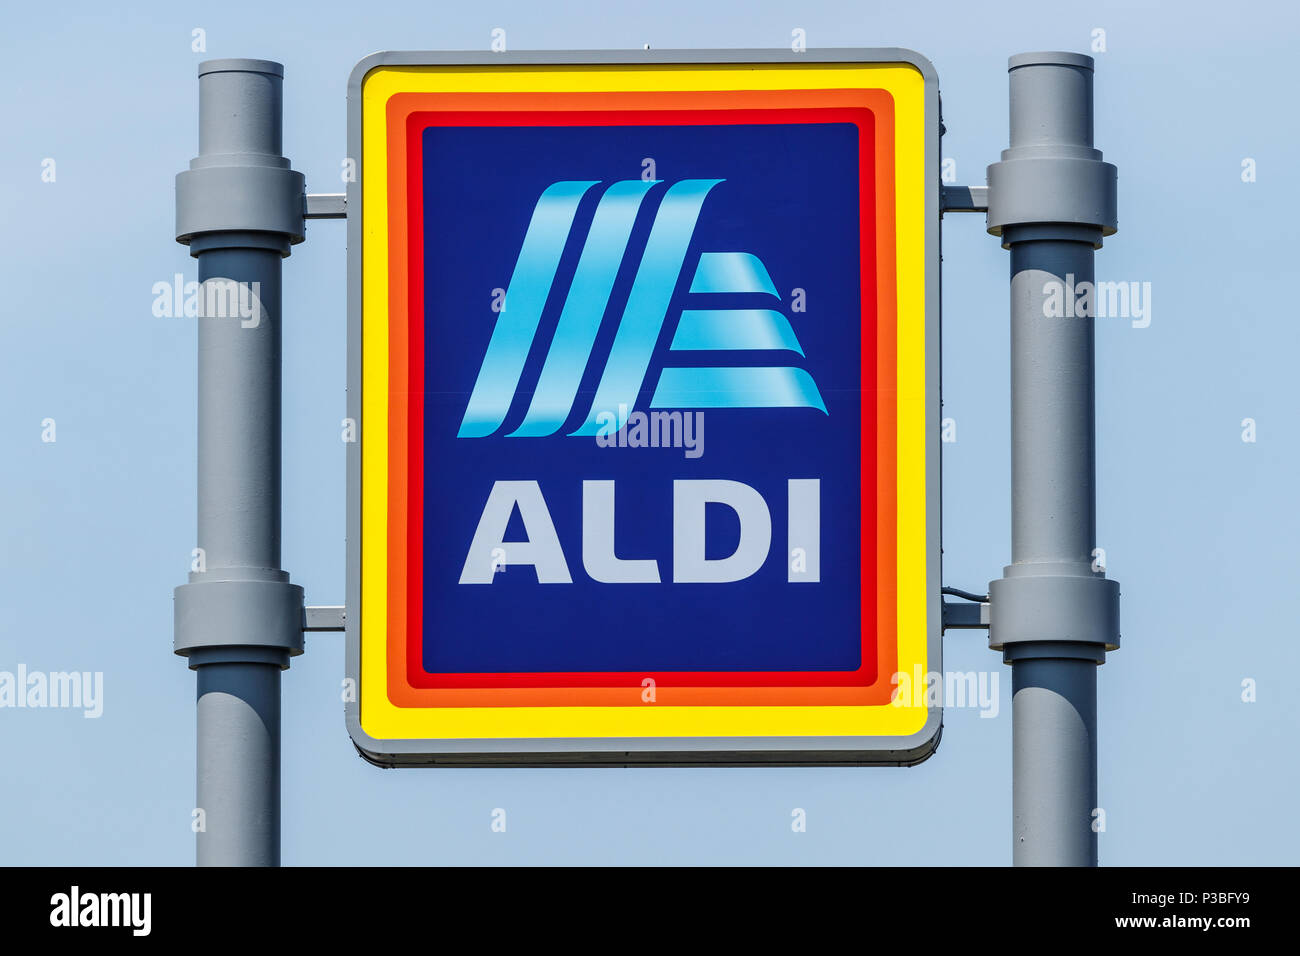 Logansport - Circa June 2018: Aldi Discount Supermarket. Aldi sells a range of grocery items, including produce, meat & dairy, at discount prices IV Stock Photo